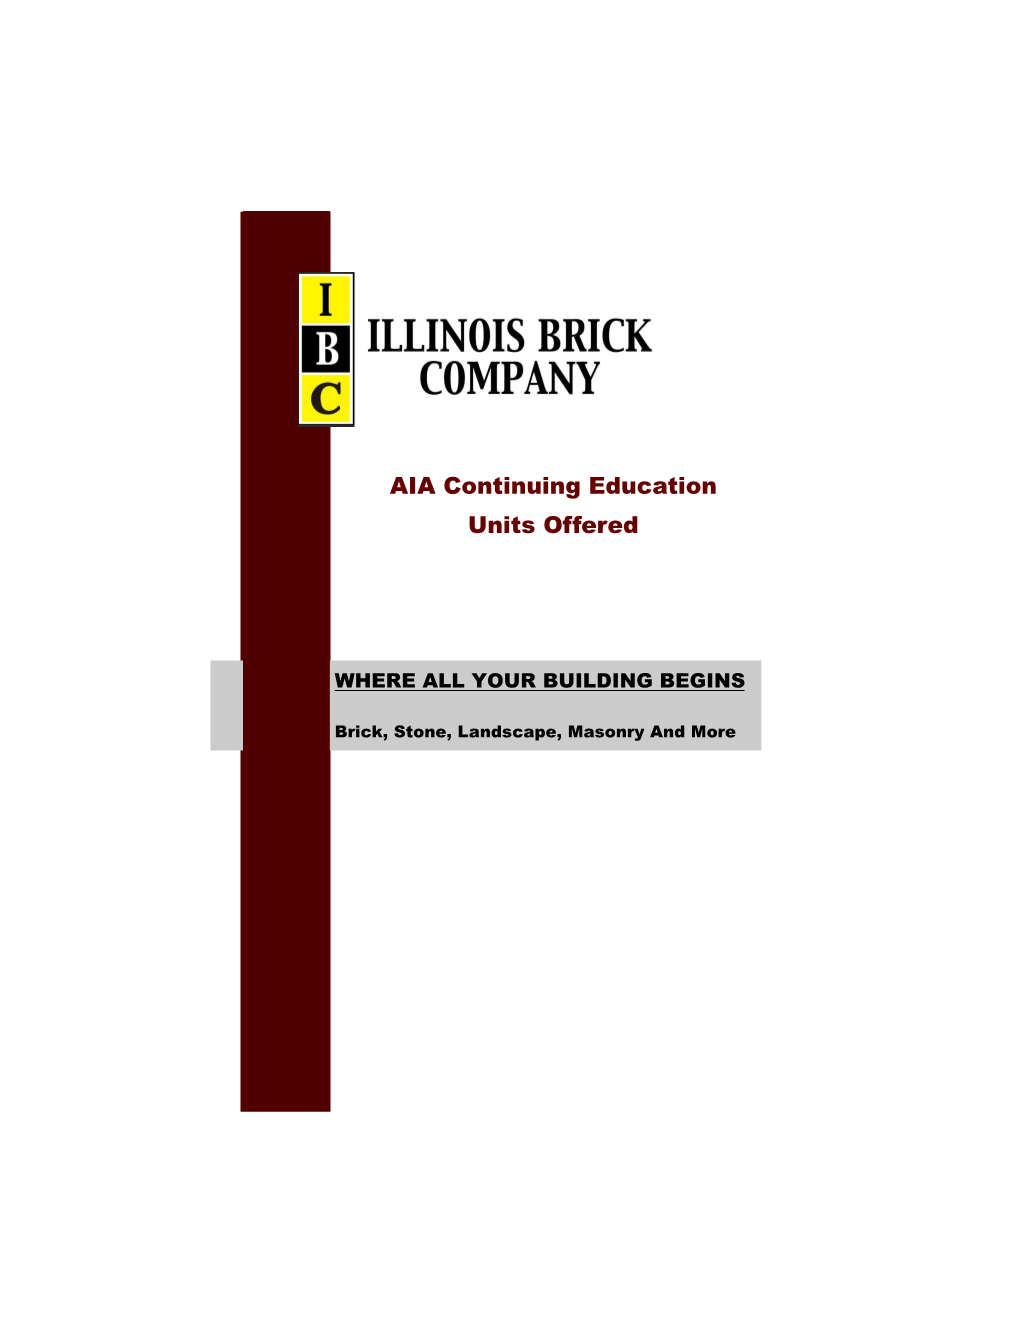 AIA Continuing Education Units Offered